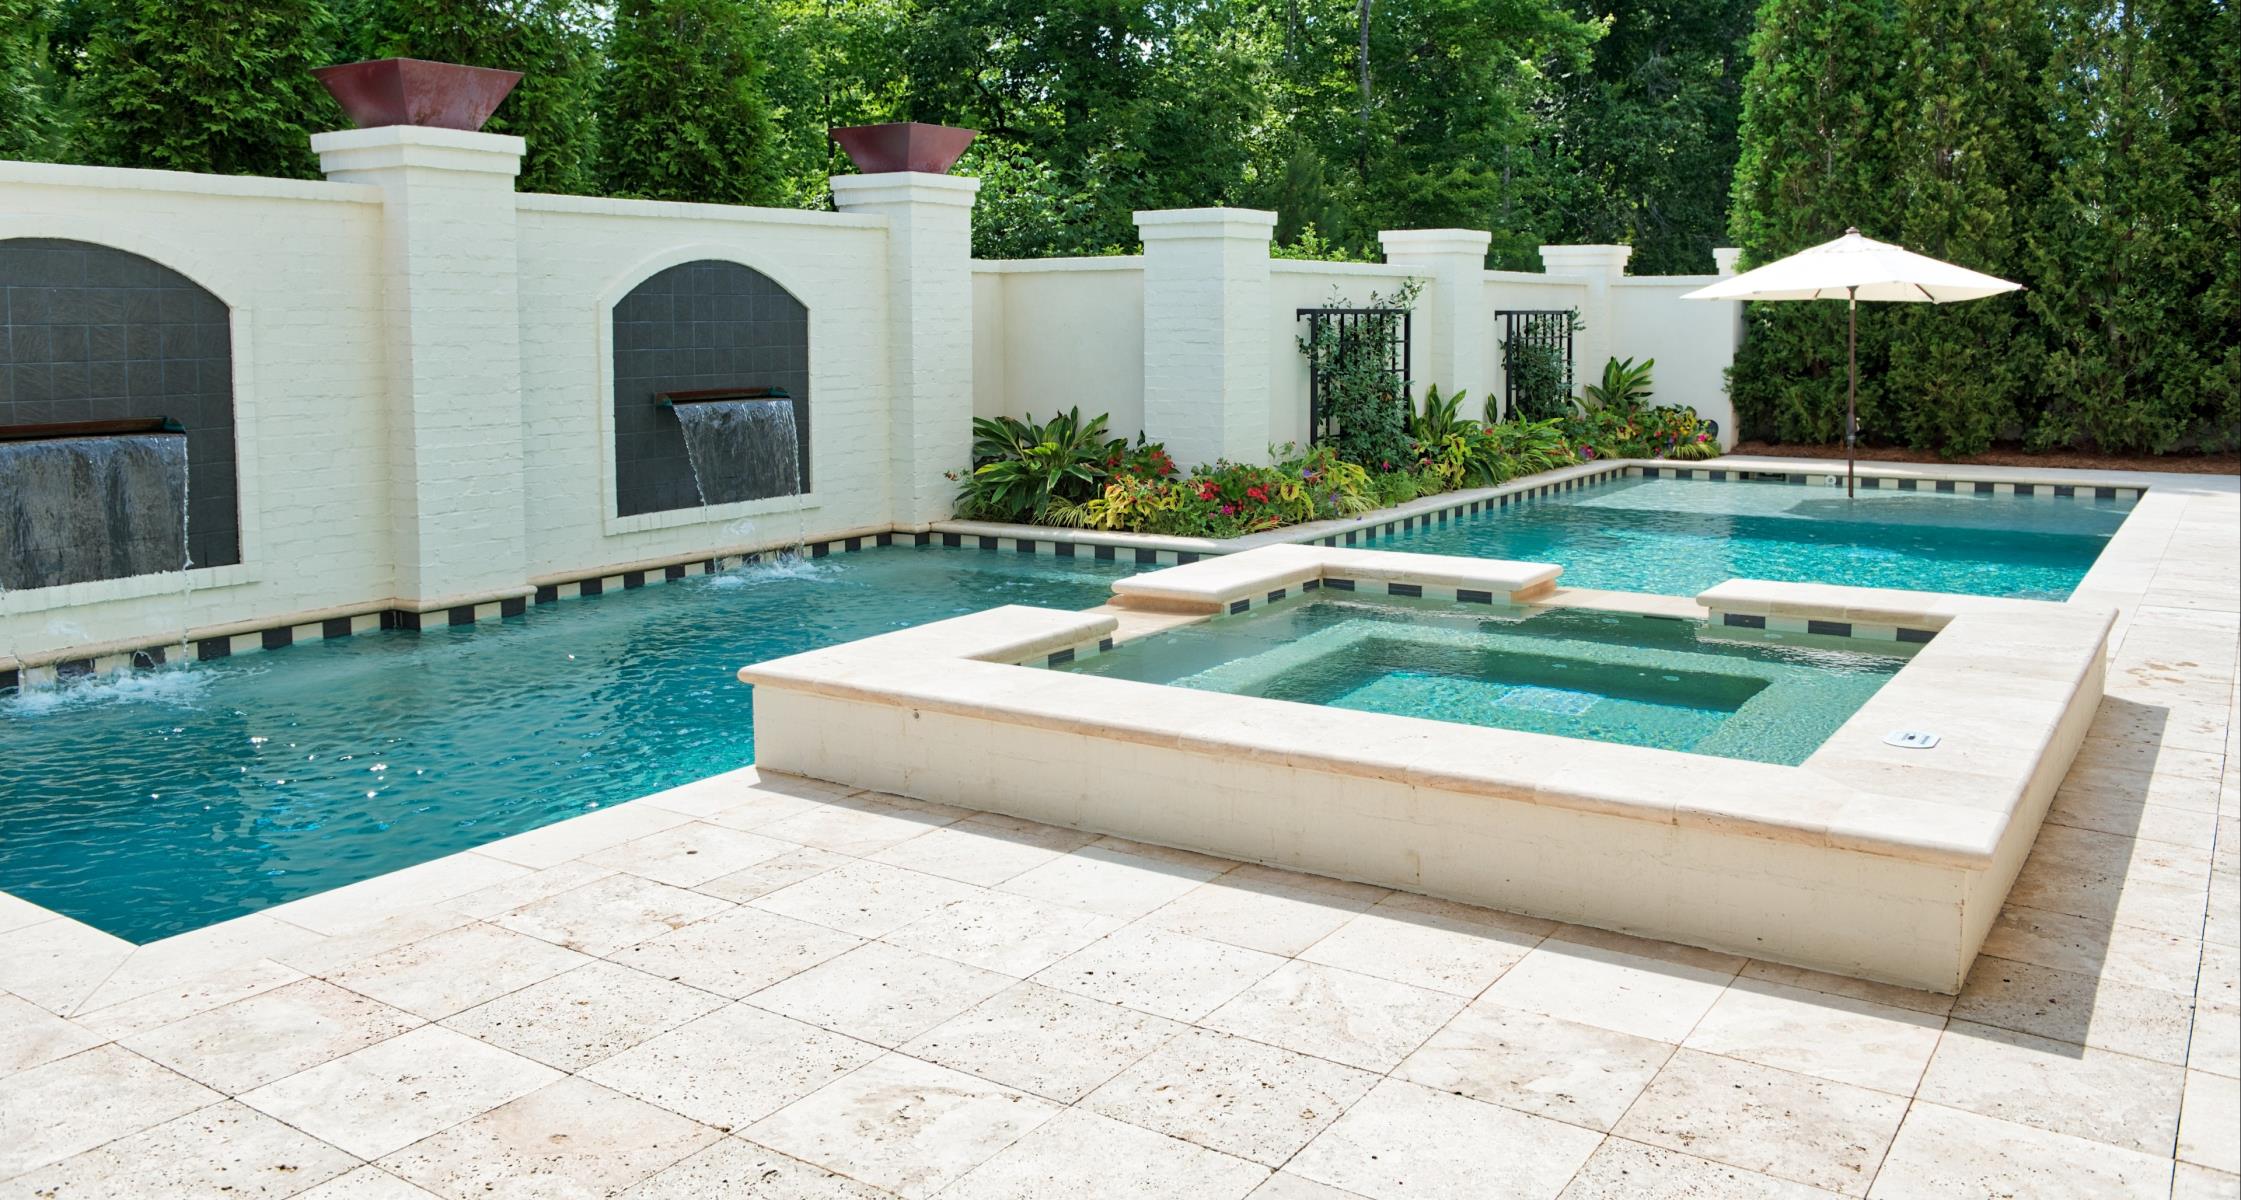 The benefits of installing a backyard pool